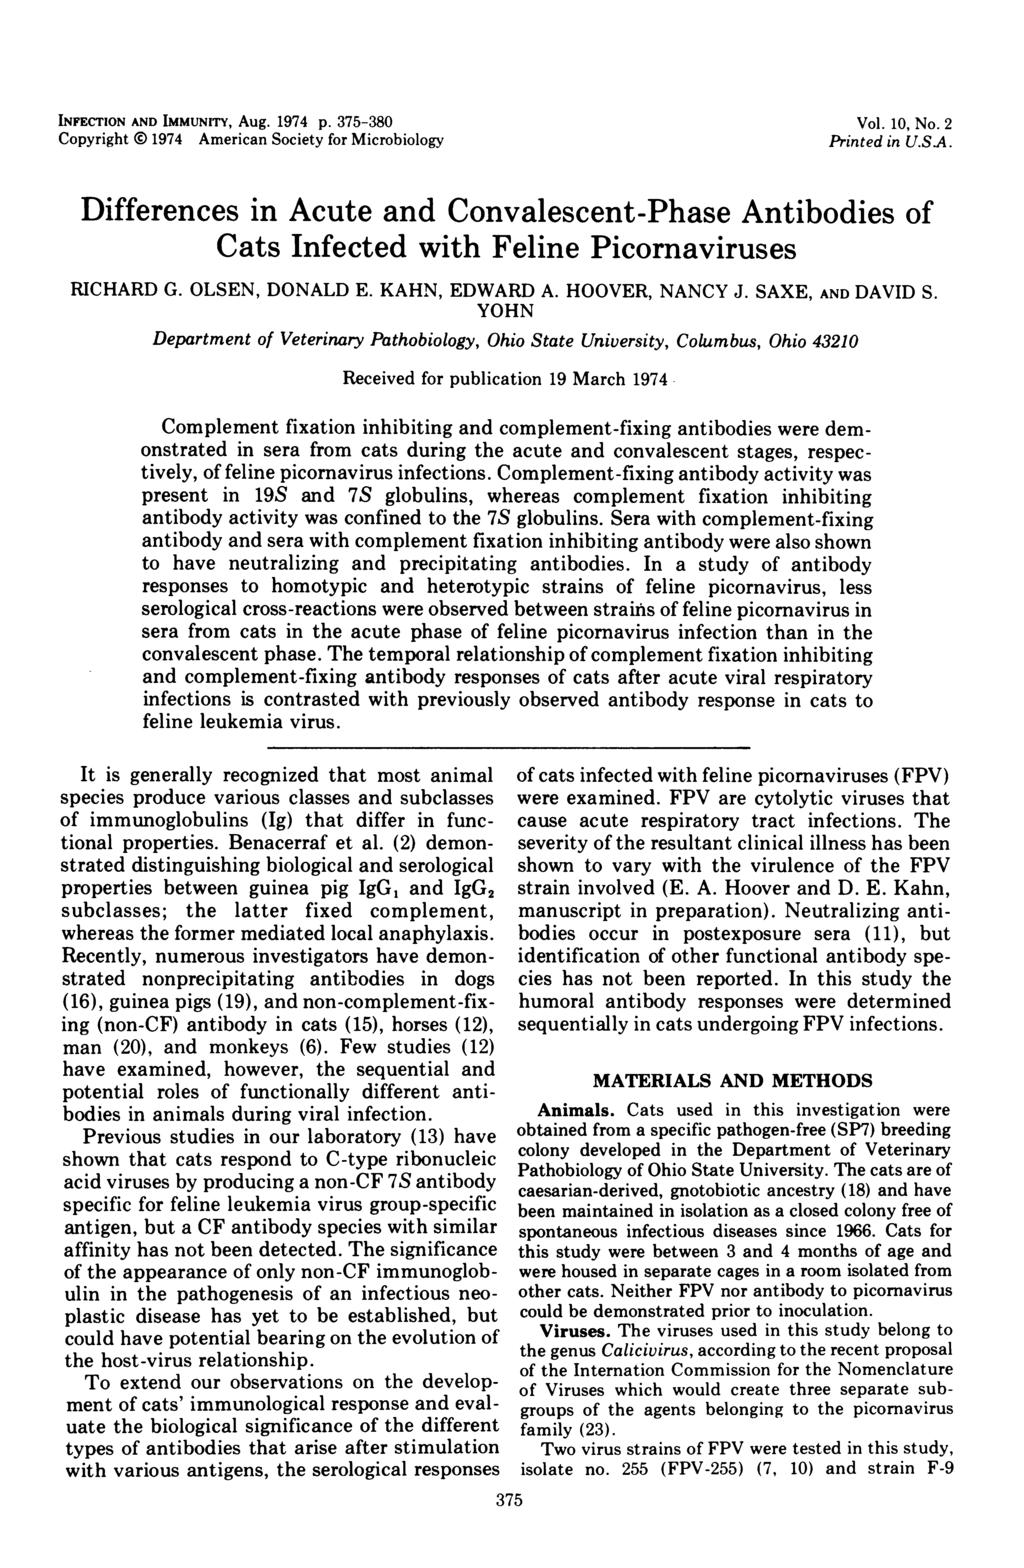 INFECTION AND IMMUNITY, Aug. 1974 p. 375-380 Copyright 0 1974 American Society for Microbiology Vol. 10, No. 2 Printed in U.SA.